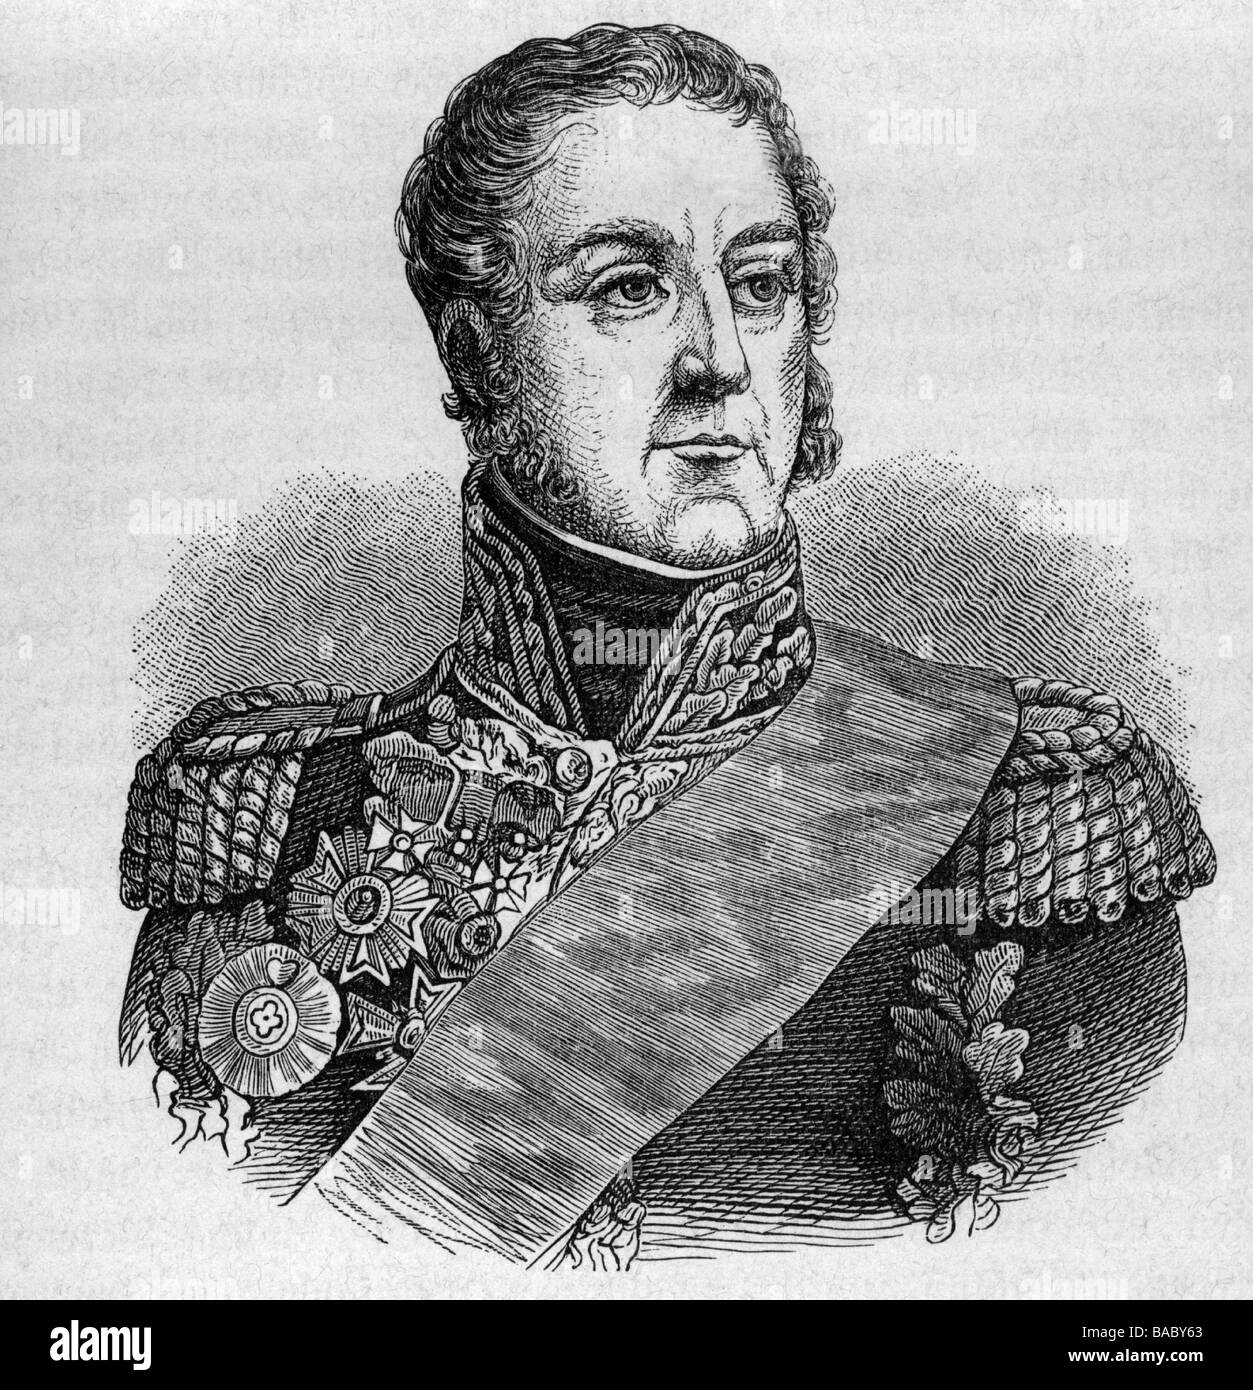 Mortier, Edouard Adolphe, 12.21768 - 28.7.1835, Fench general, portrait, wood engraving, 19th century, , Stock Photo